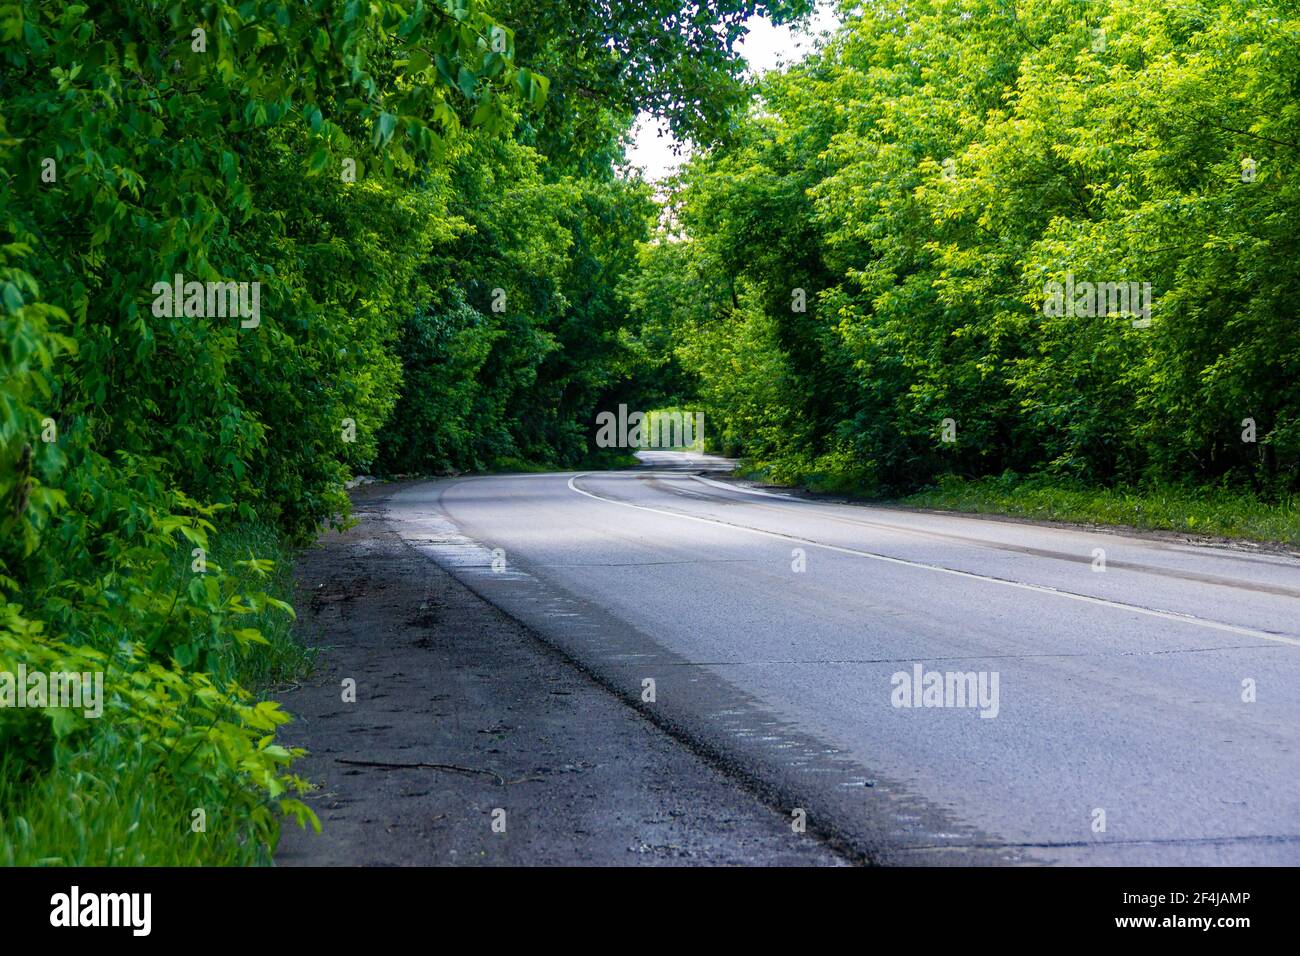 after rain, a wet curved asphalt road passes through the forest forming green arches from the branches through which cars travel Stock Photo